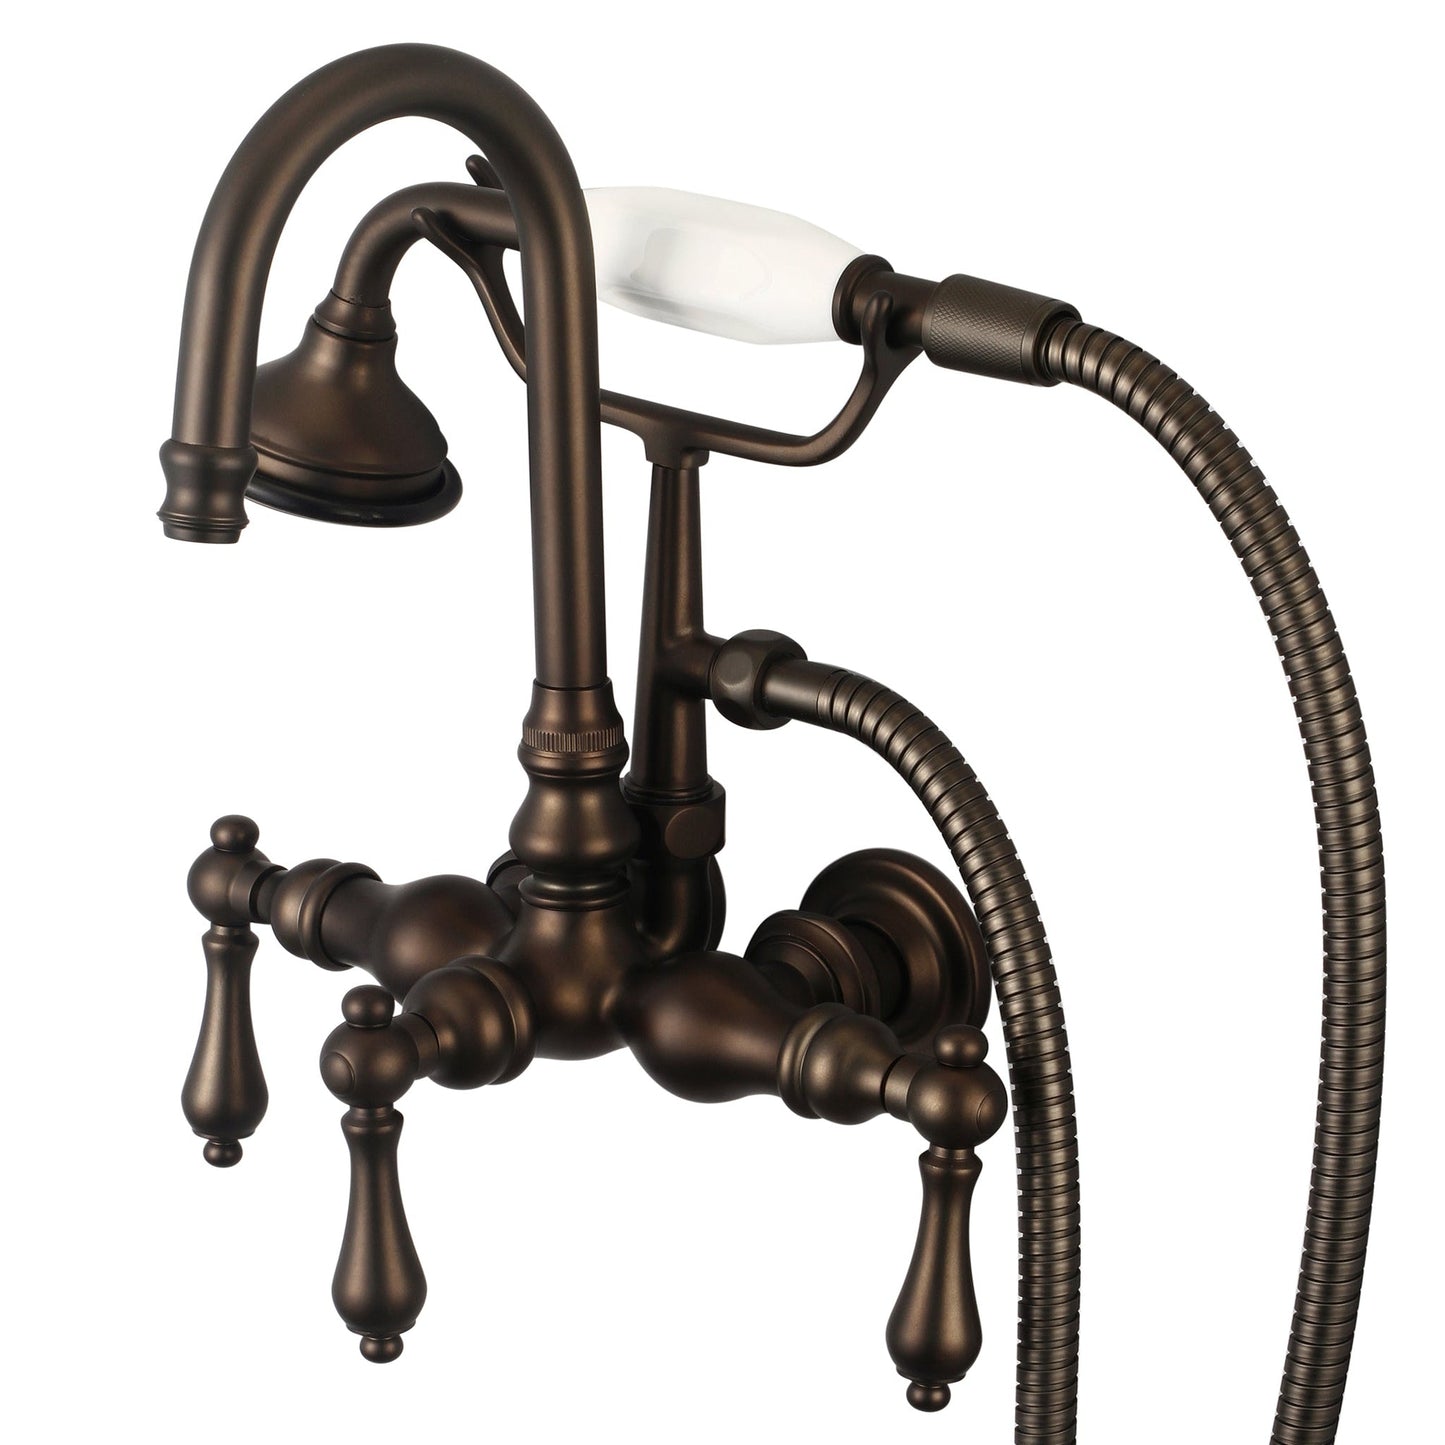 Water Creation Vintage Classic Center Wall Mount Tub F6-0012 9.25" Brown Solid Brass Faucet With Gooseneck Spout, Straight Wall Connector And Handheld Shower And Metal Lever Handles Without Labels